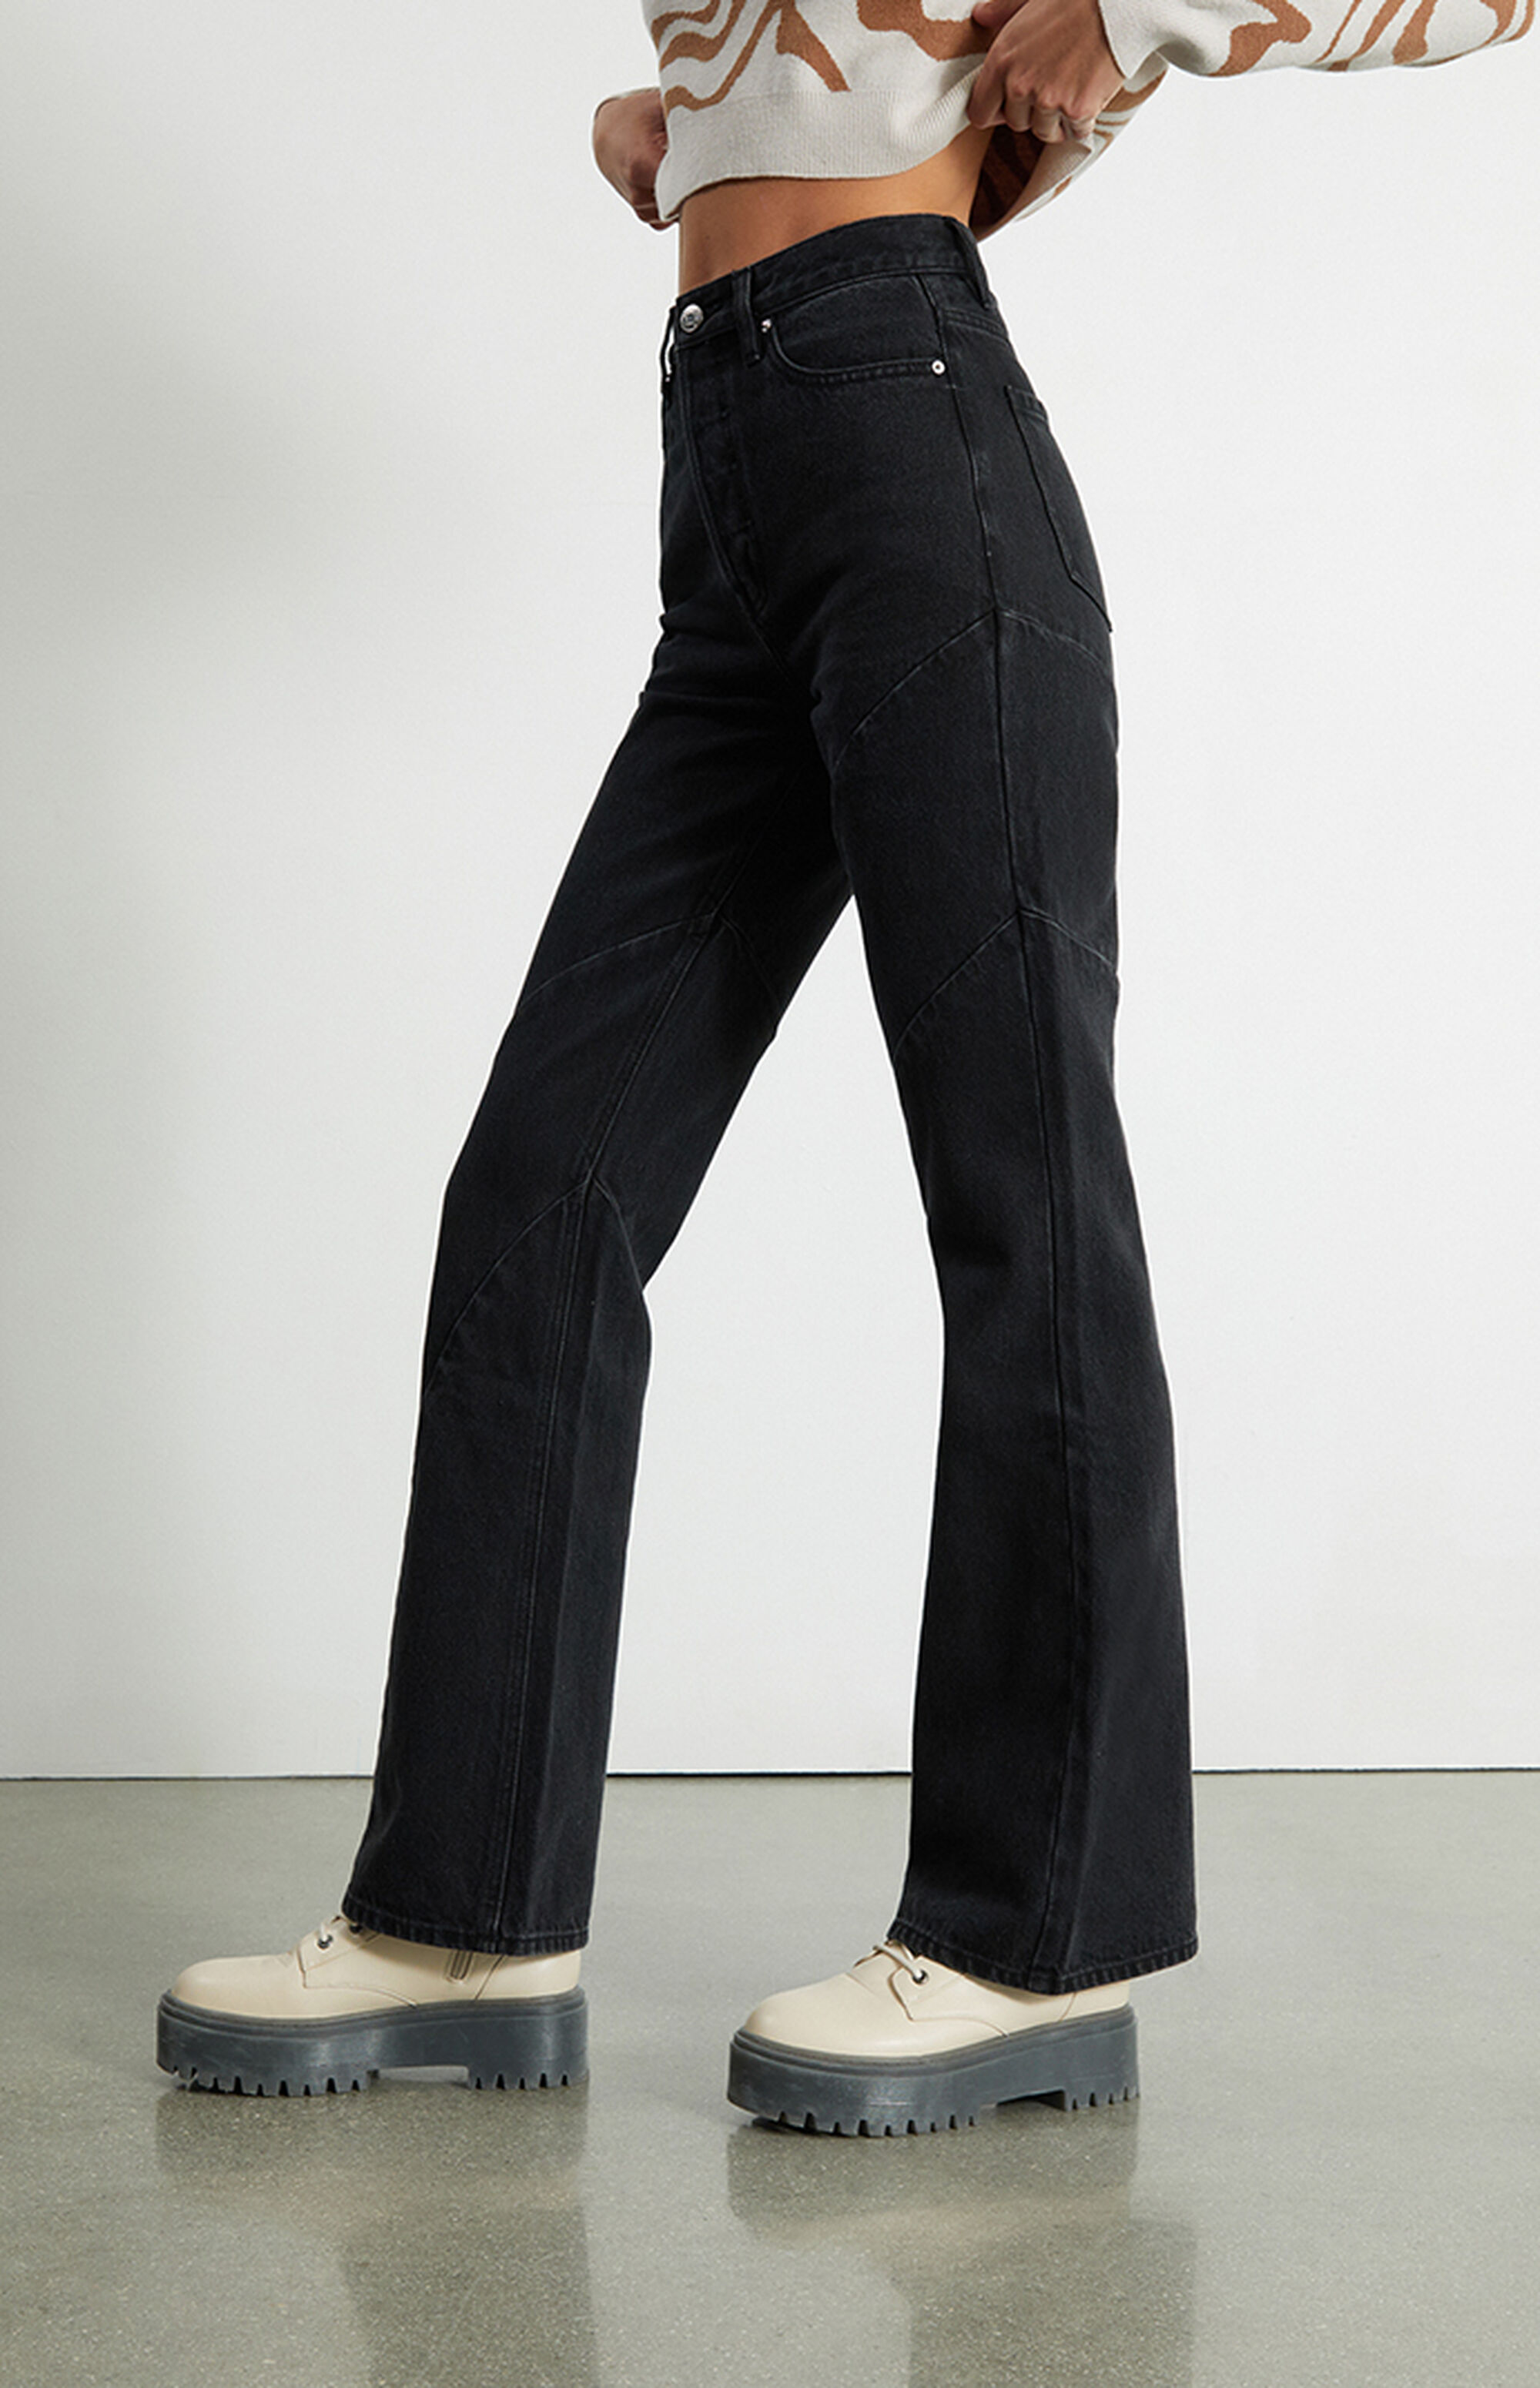 PacSun Eco Black Wave Panels High Waisted Bootcut Jeans | PacSun